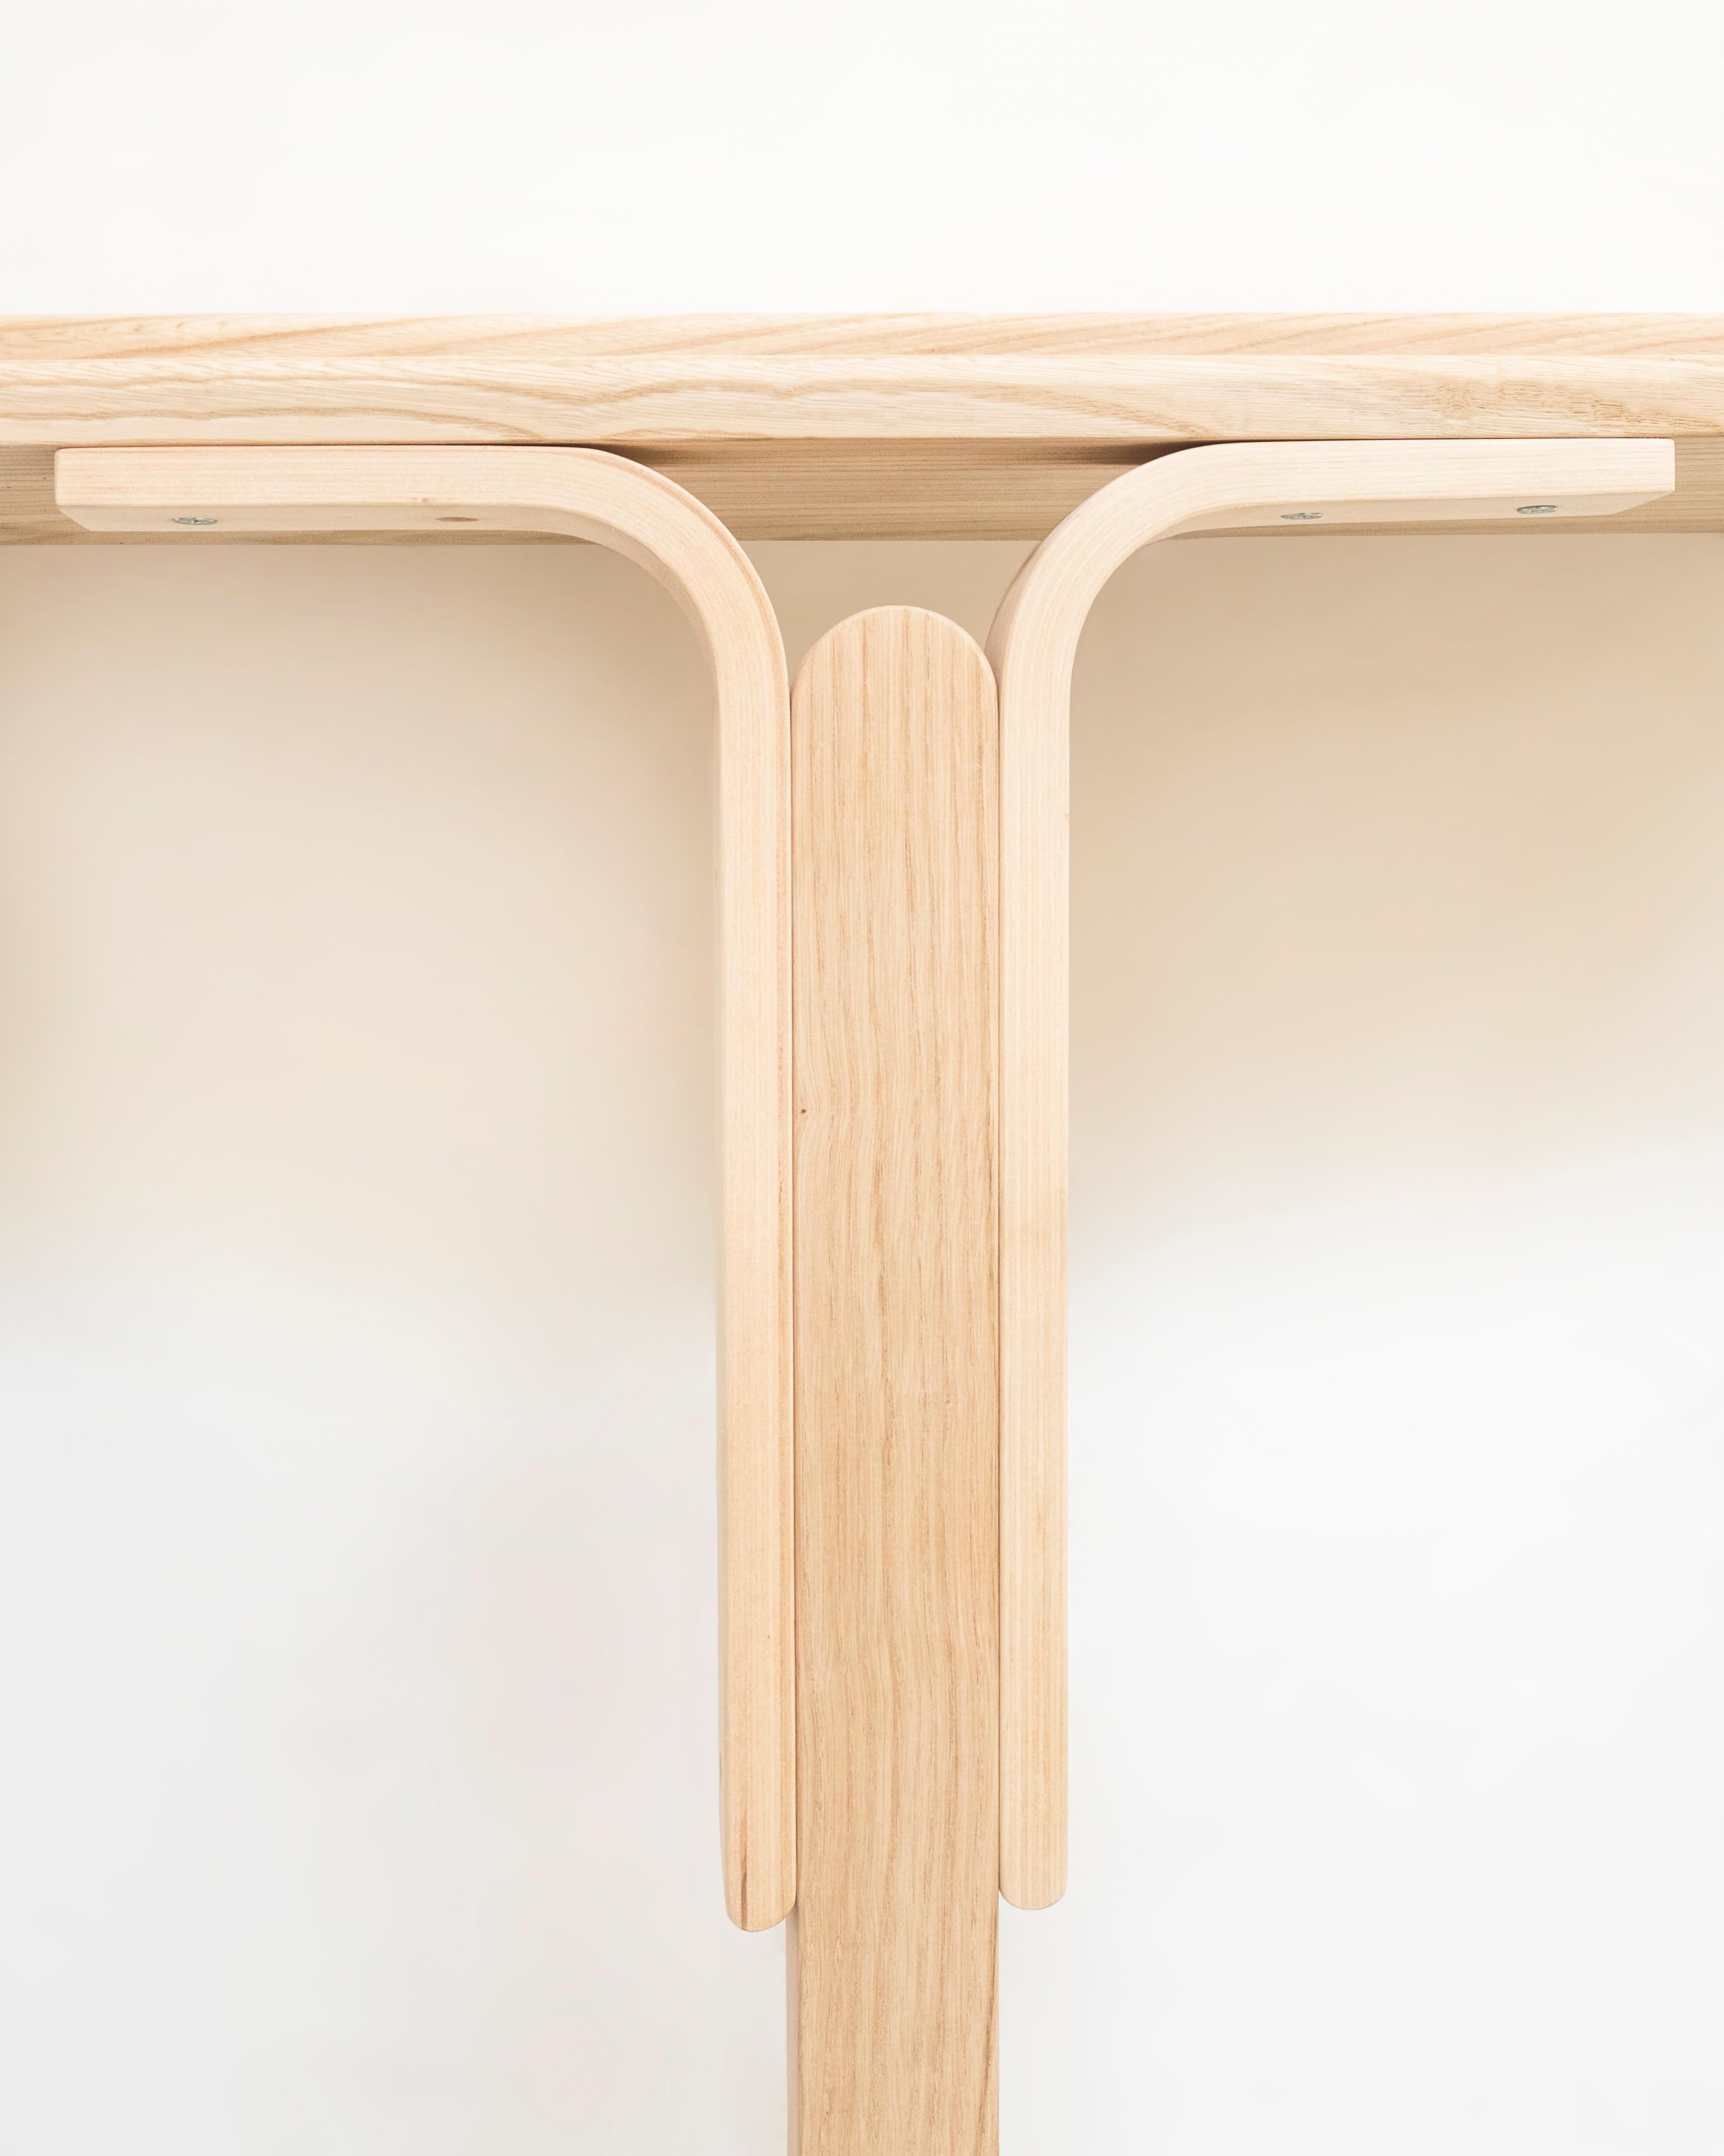 Italian 21st Century, Contemporary Wood Console Table Handmade in Italy by Ilabianchi For Sale